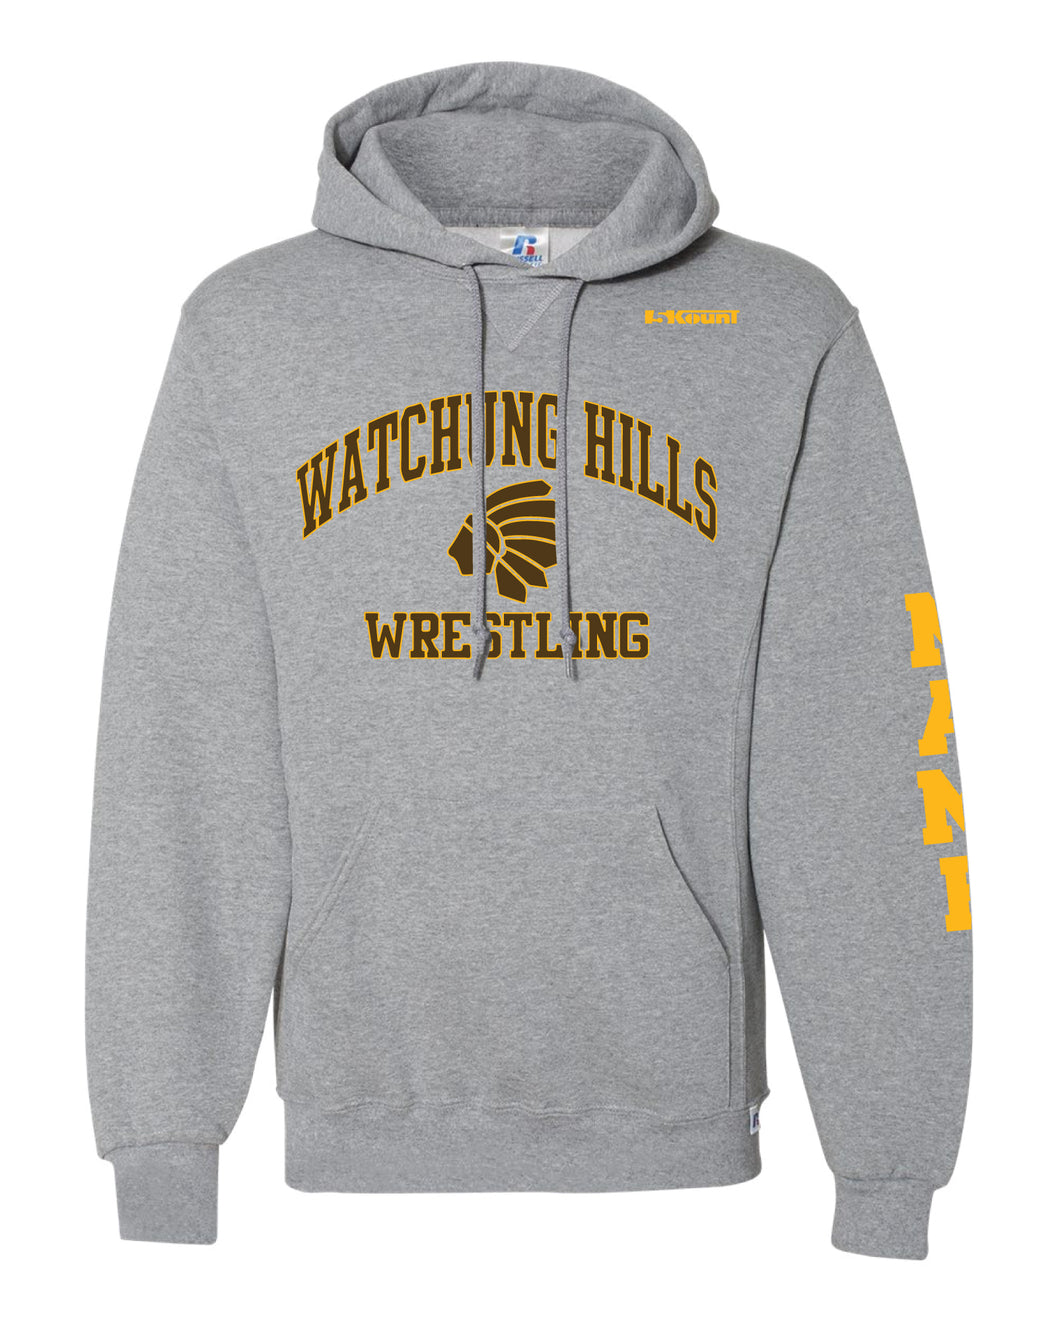 Watchung Hills Wrestling Russell Athletic Cotton Hoodie - Grey - 5KounT2018